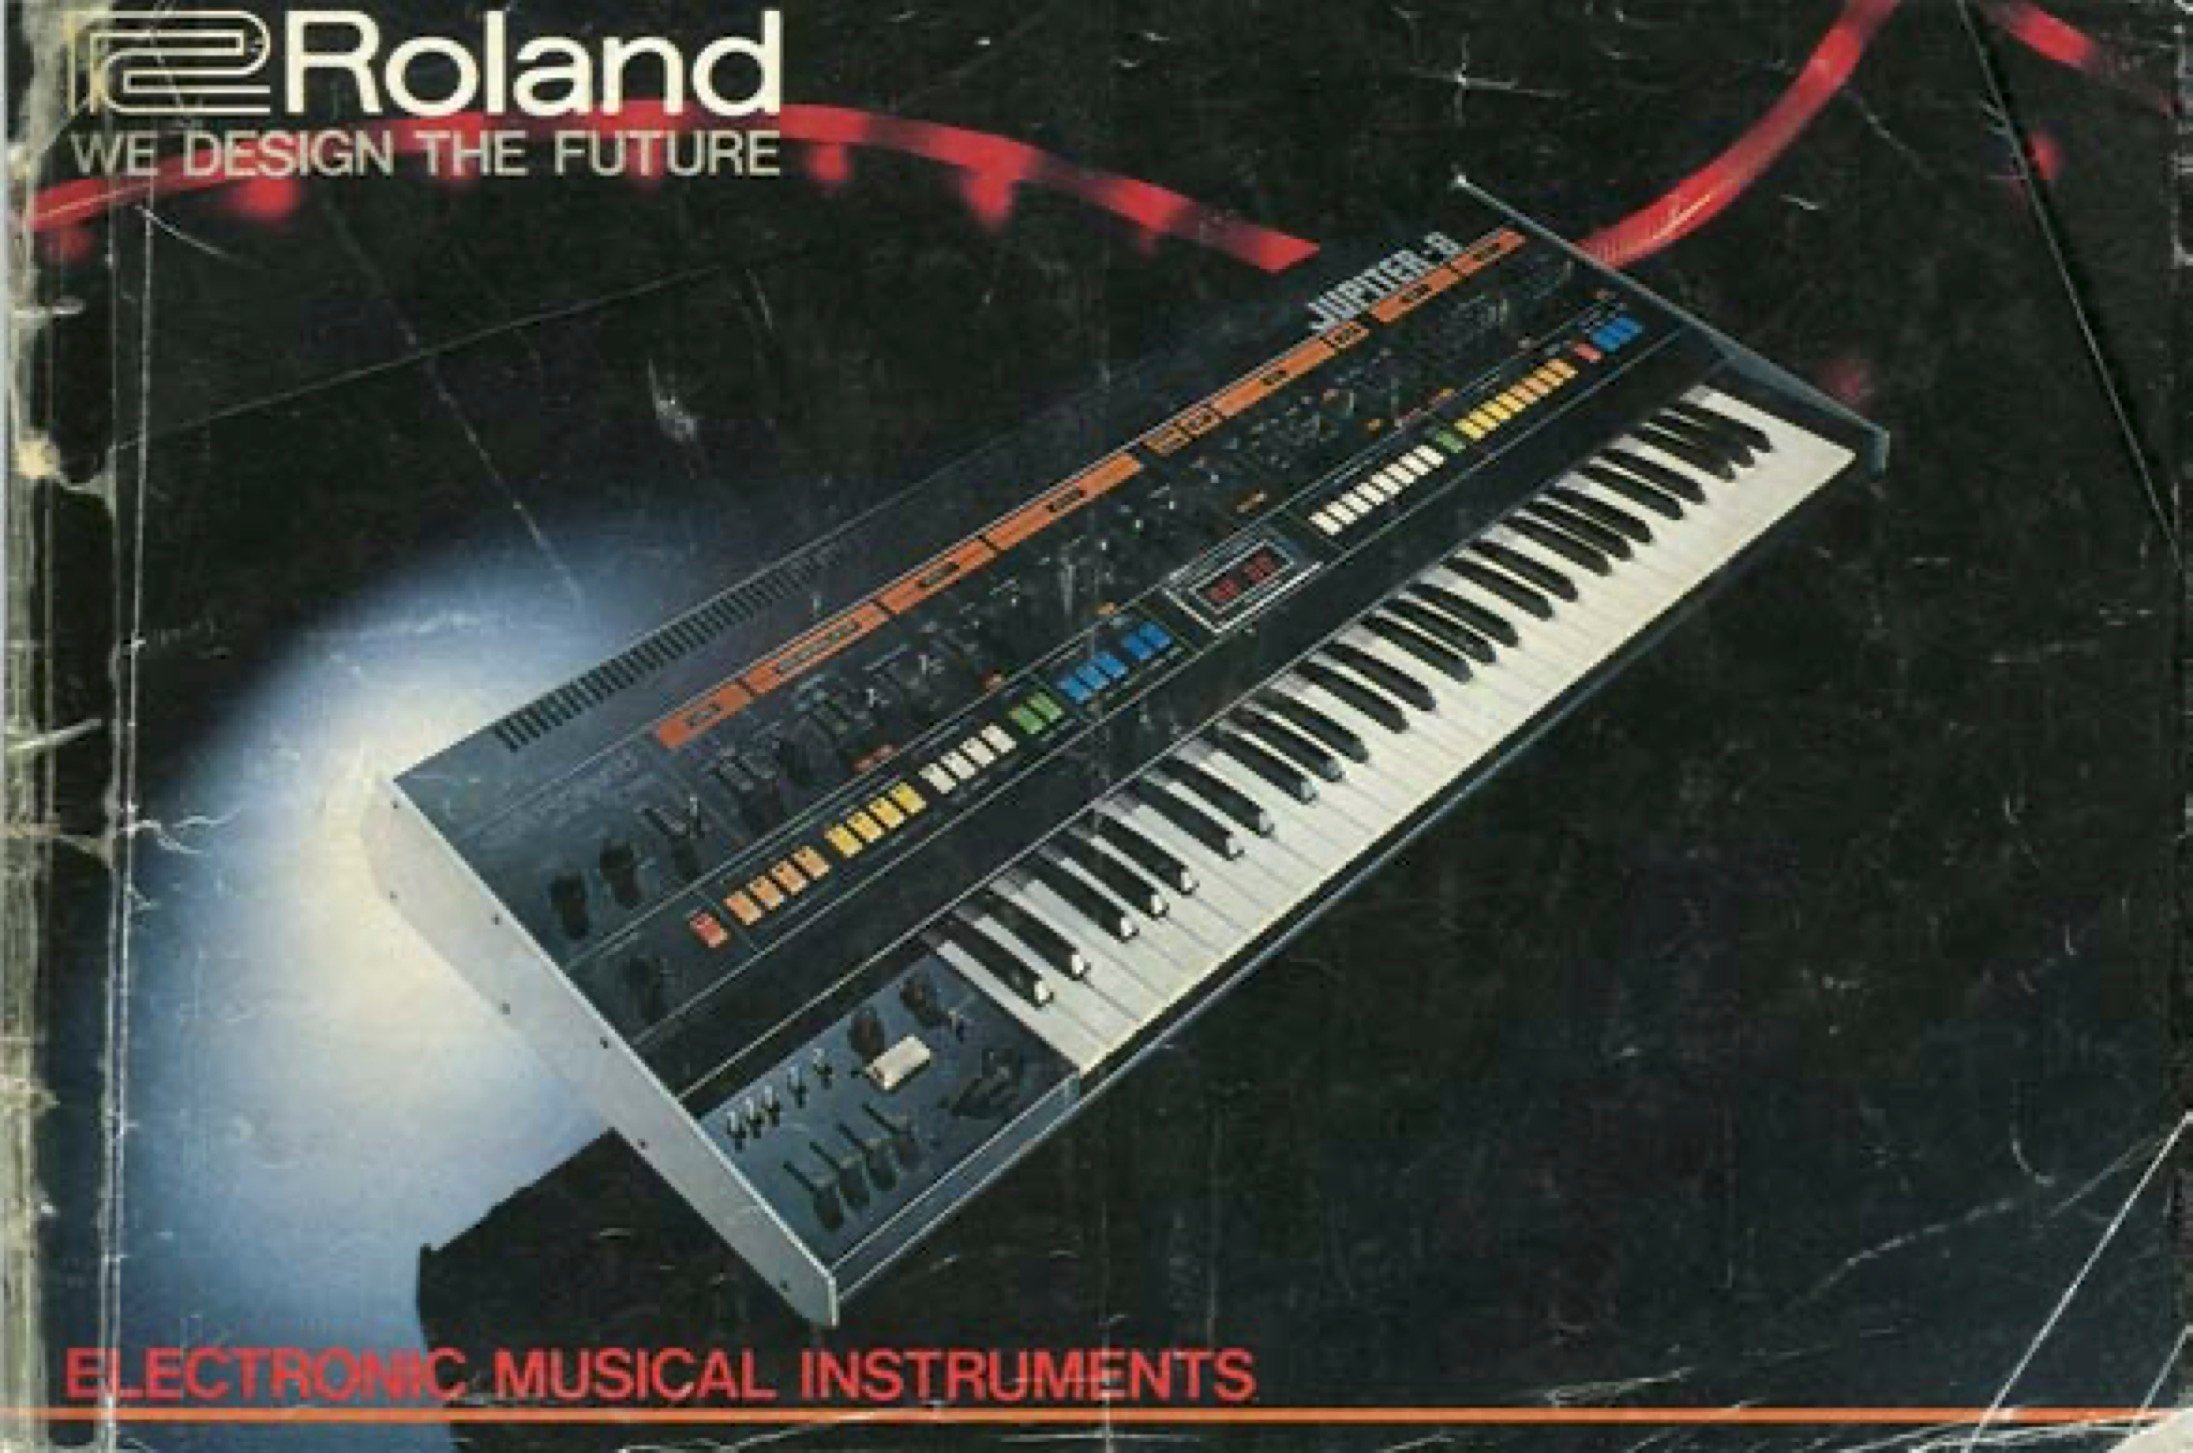 Jupiter-8 featured on the cover of Roland's 1981 Product Catalog